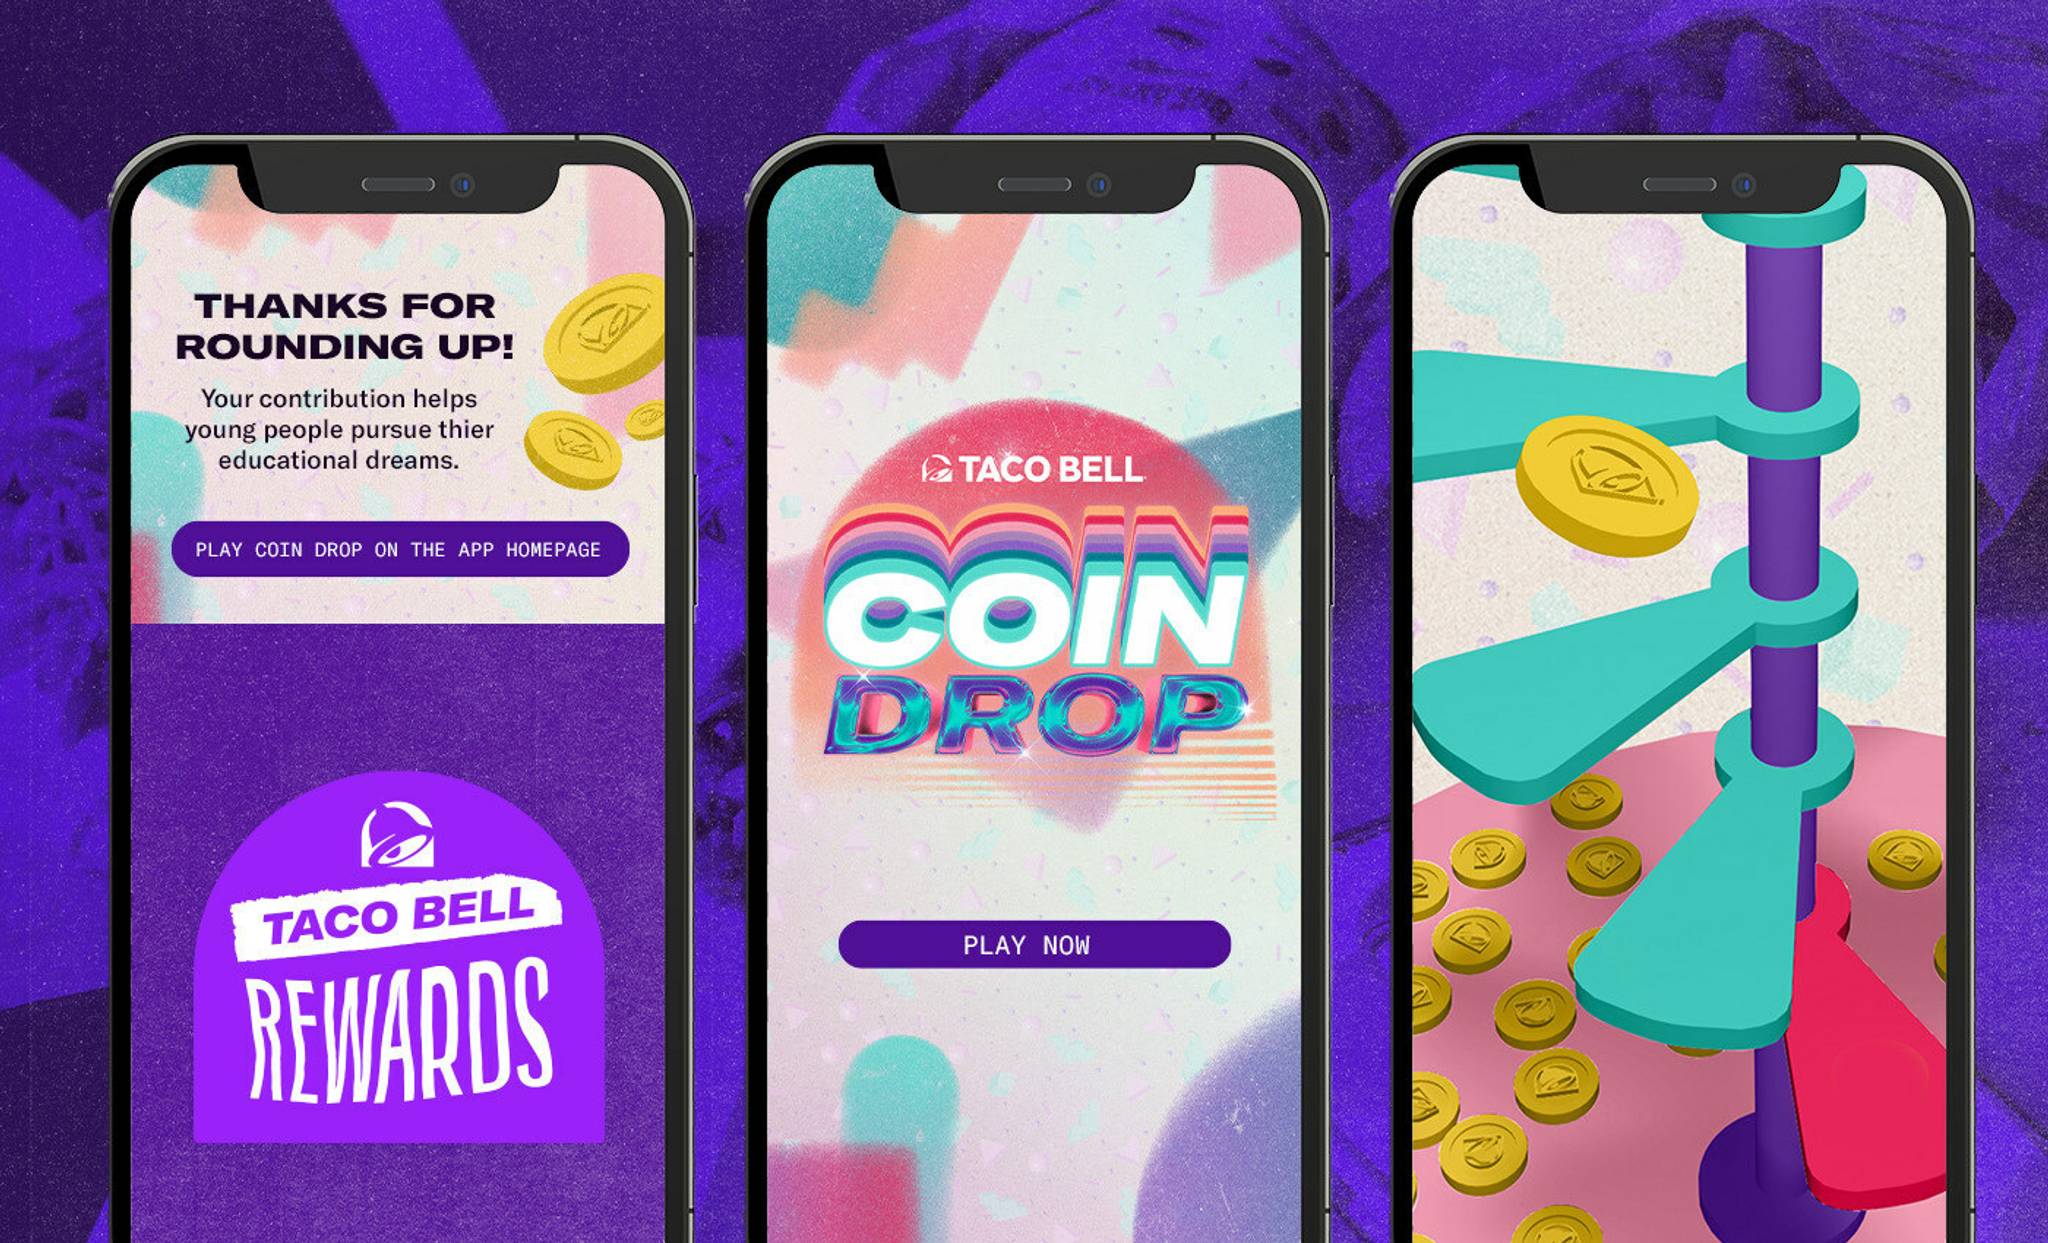 Taco Bell's coin drop marries nostalgia with charity